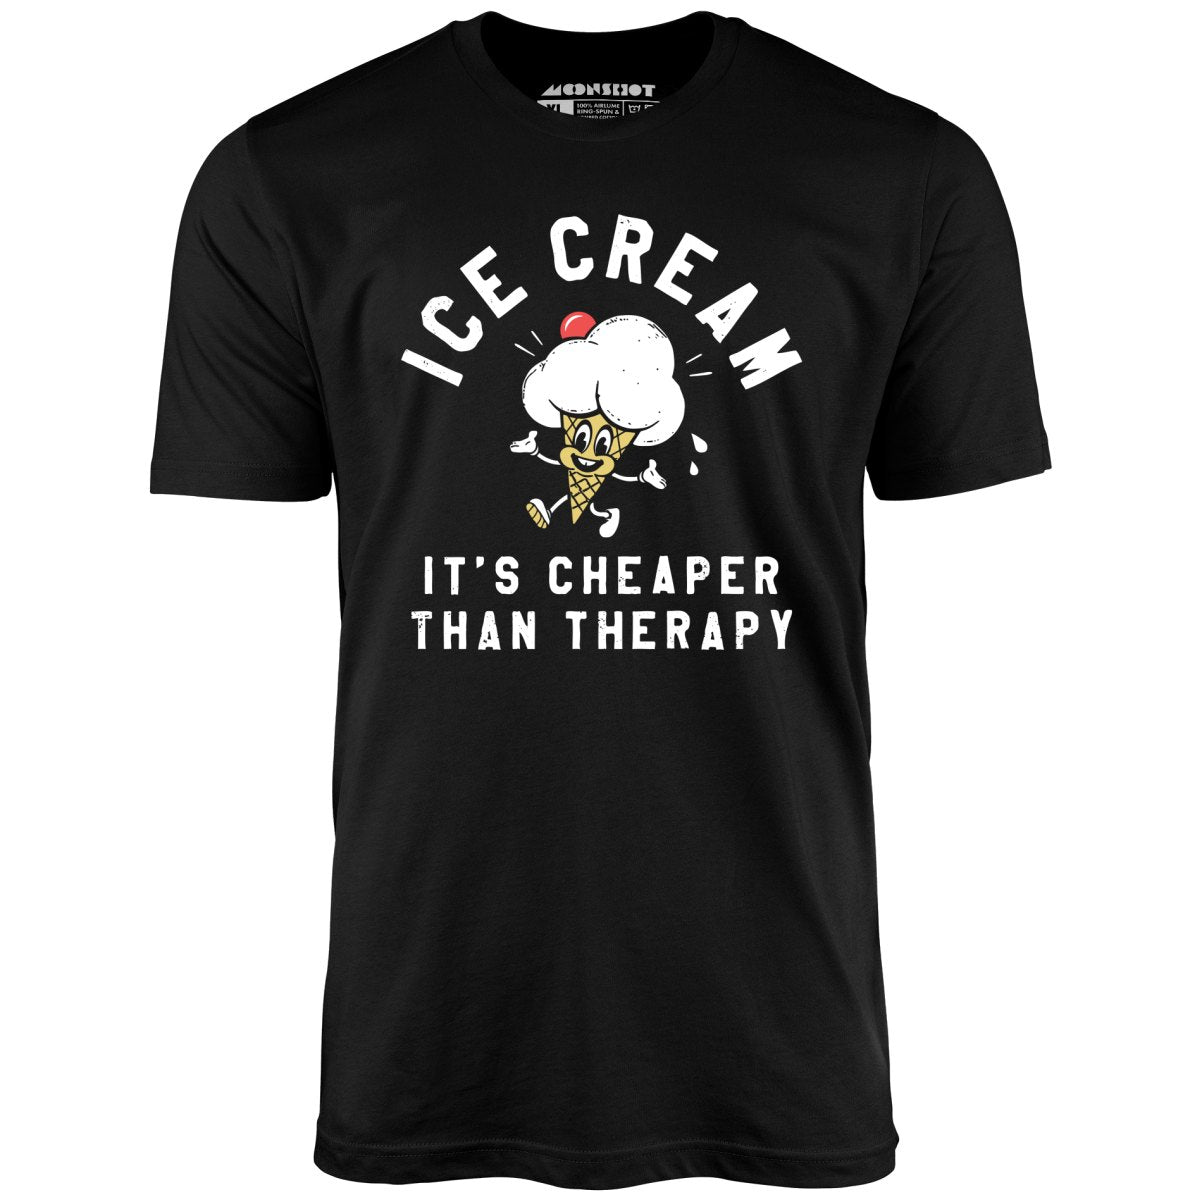 Ice Cream It's Cheaper Than Therapy - Unisex T-Shirt